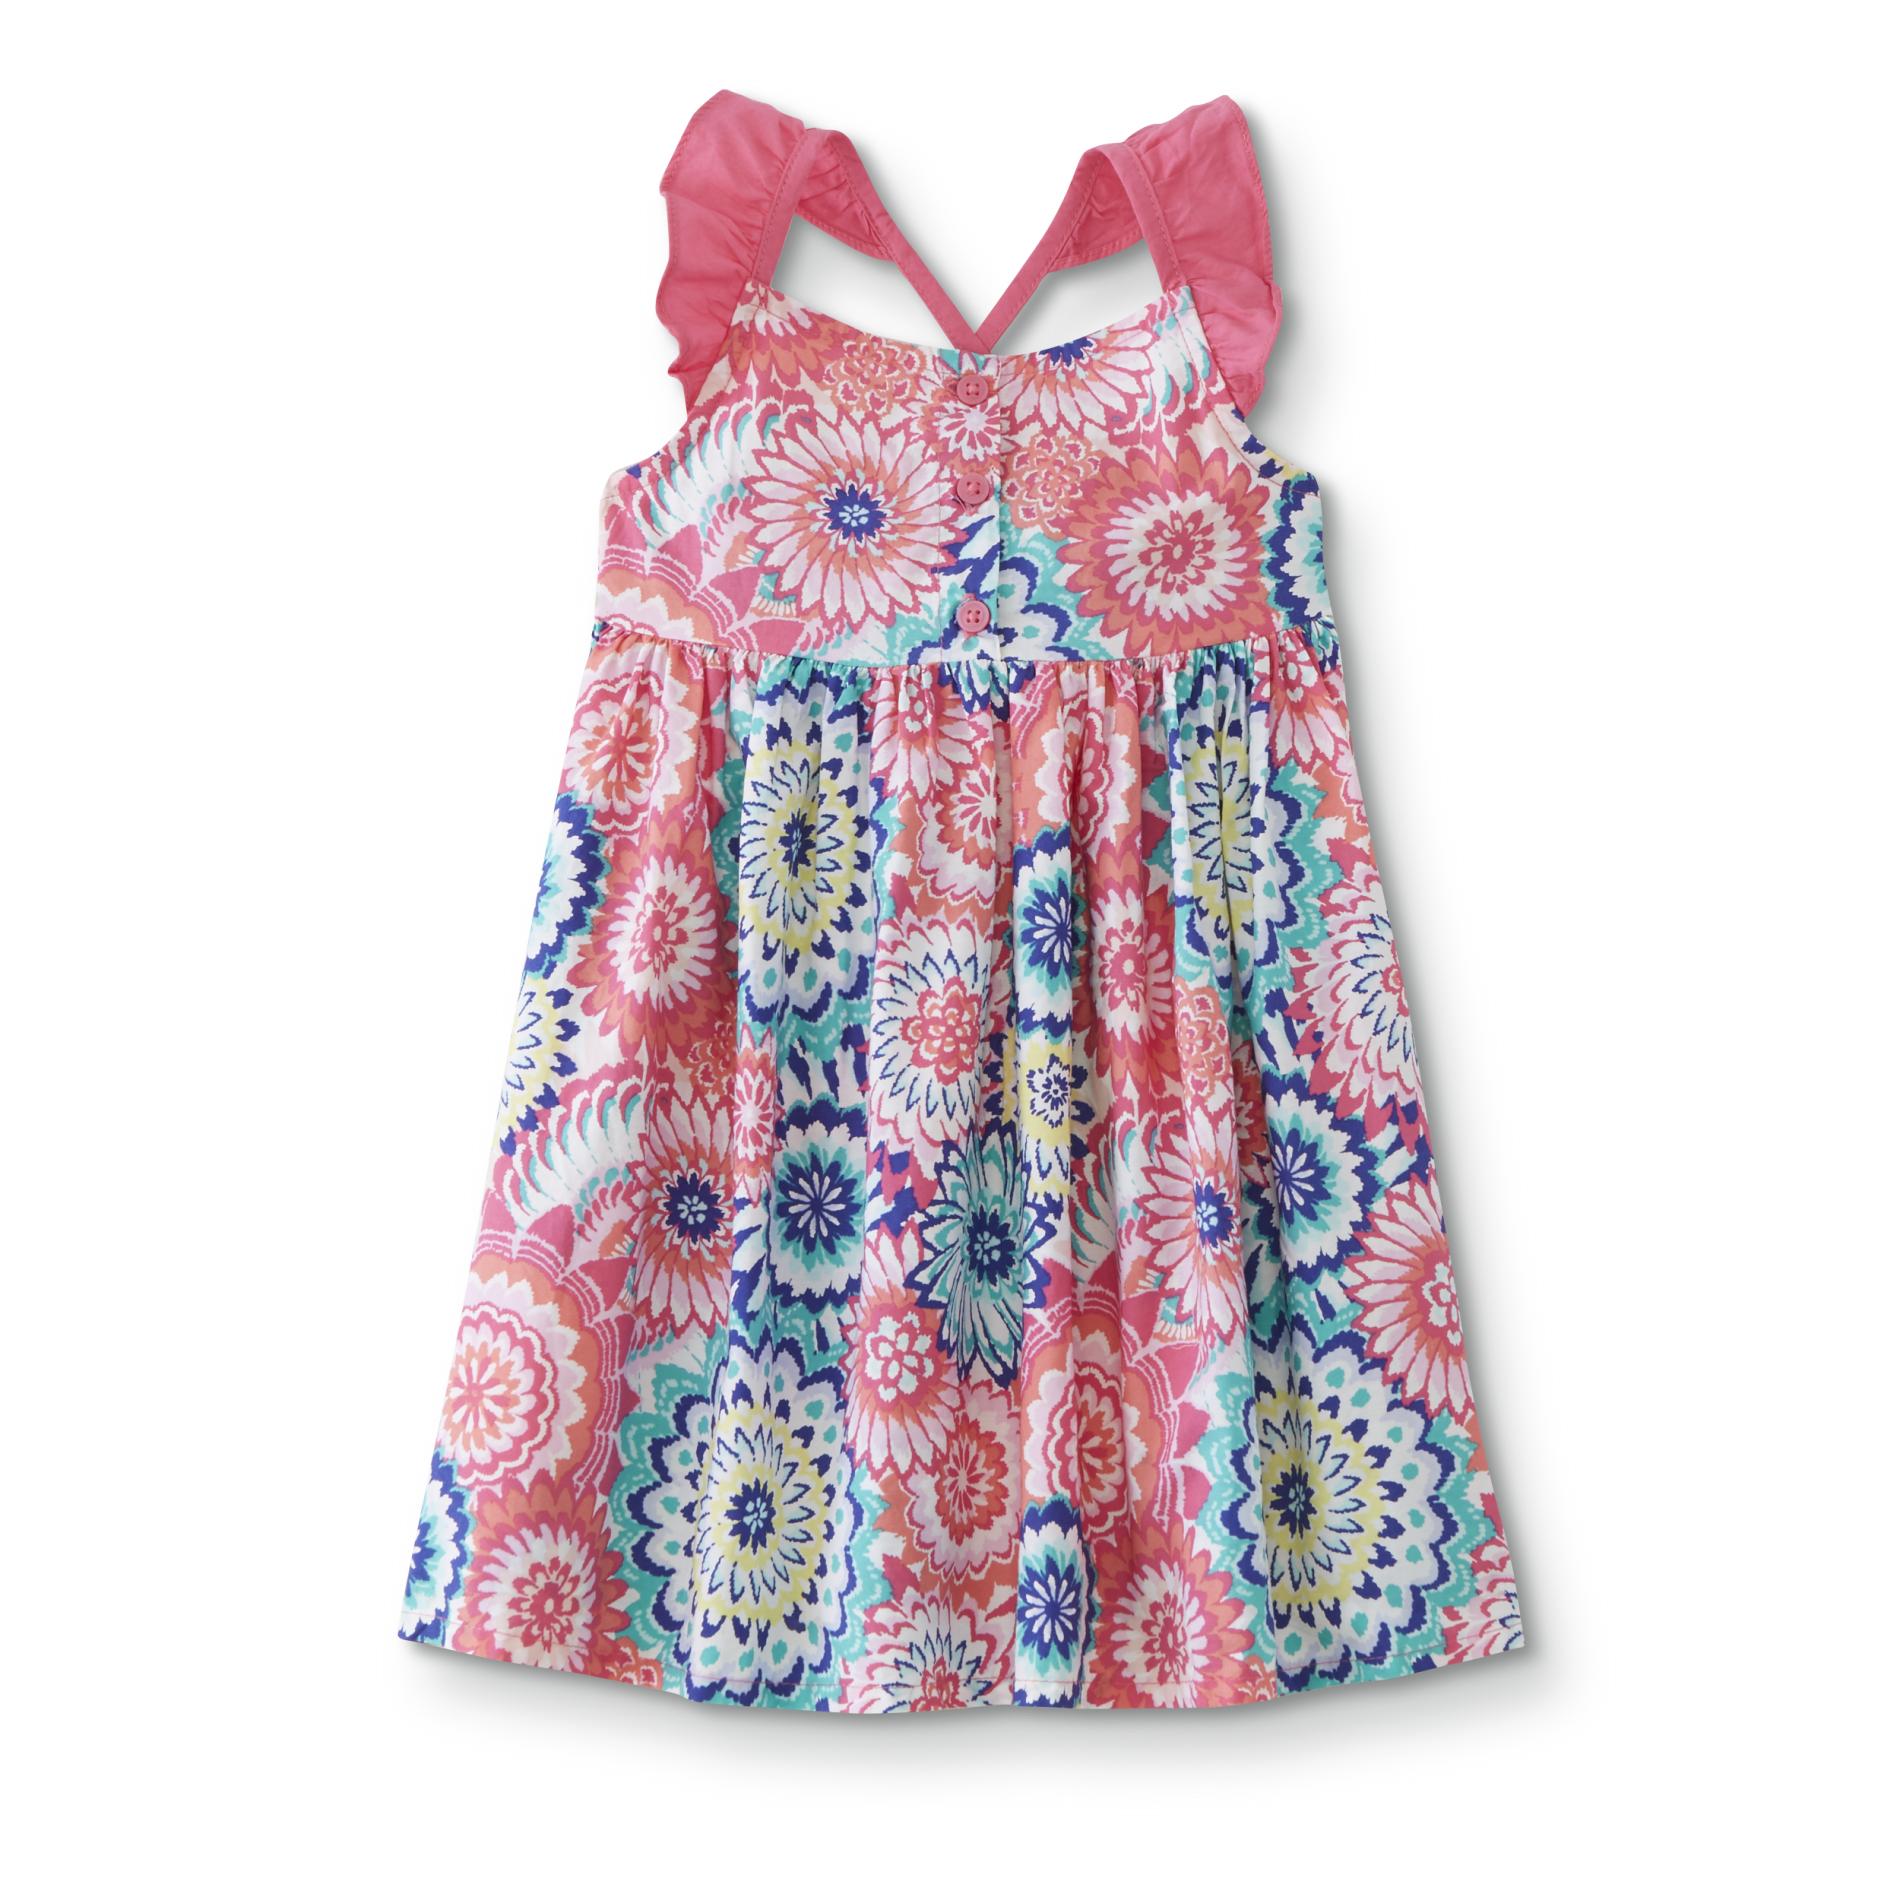 Special Editions Infant & Toddler Girls' Fit & Flare Dress - Floral